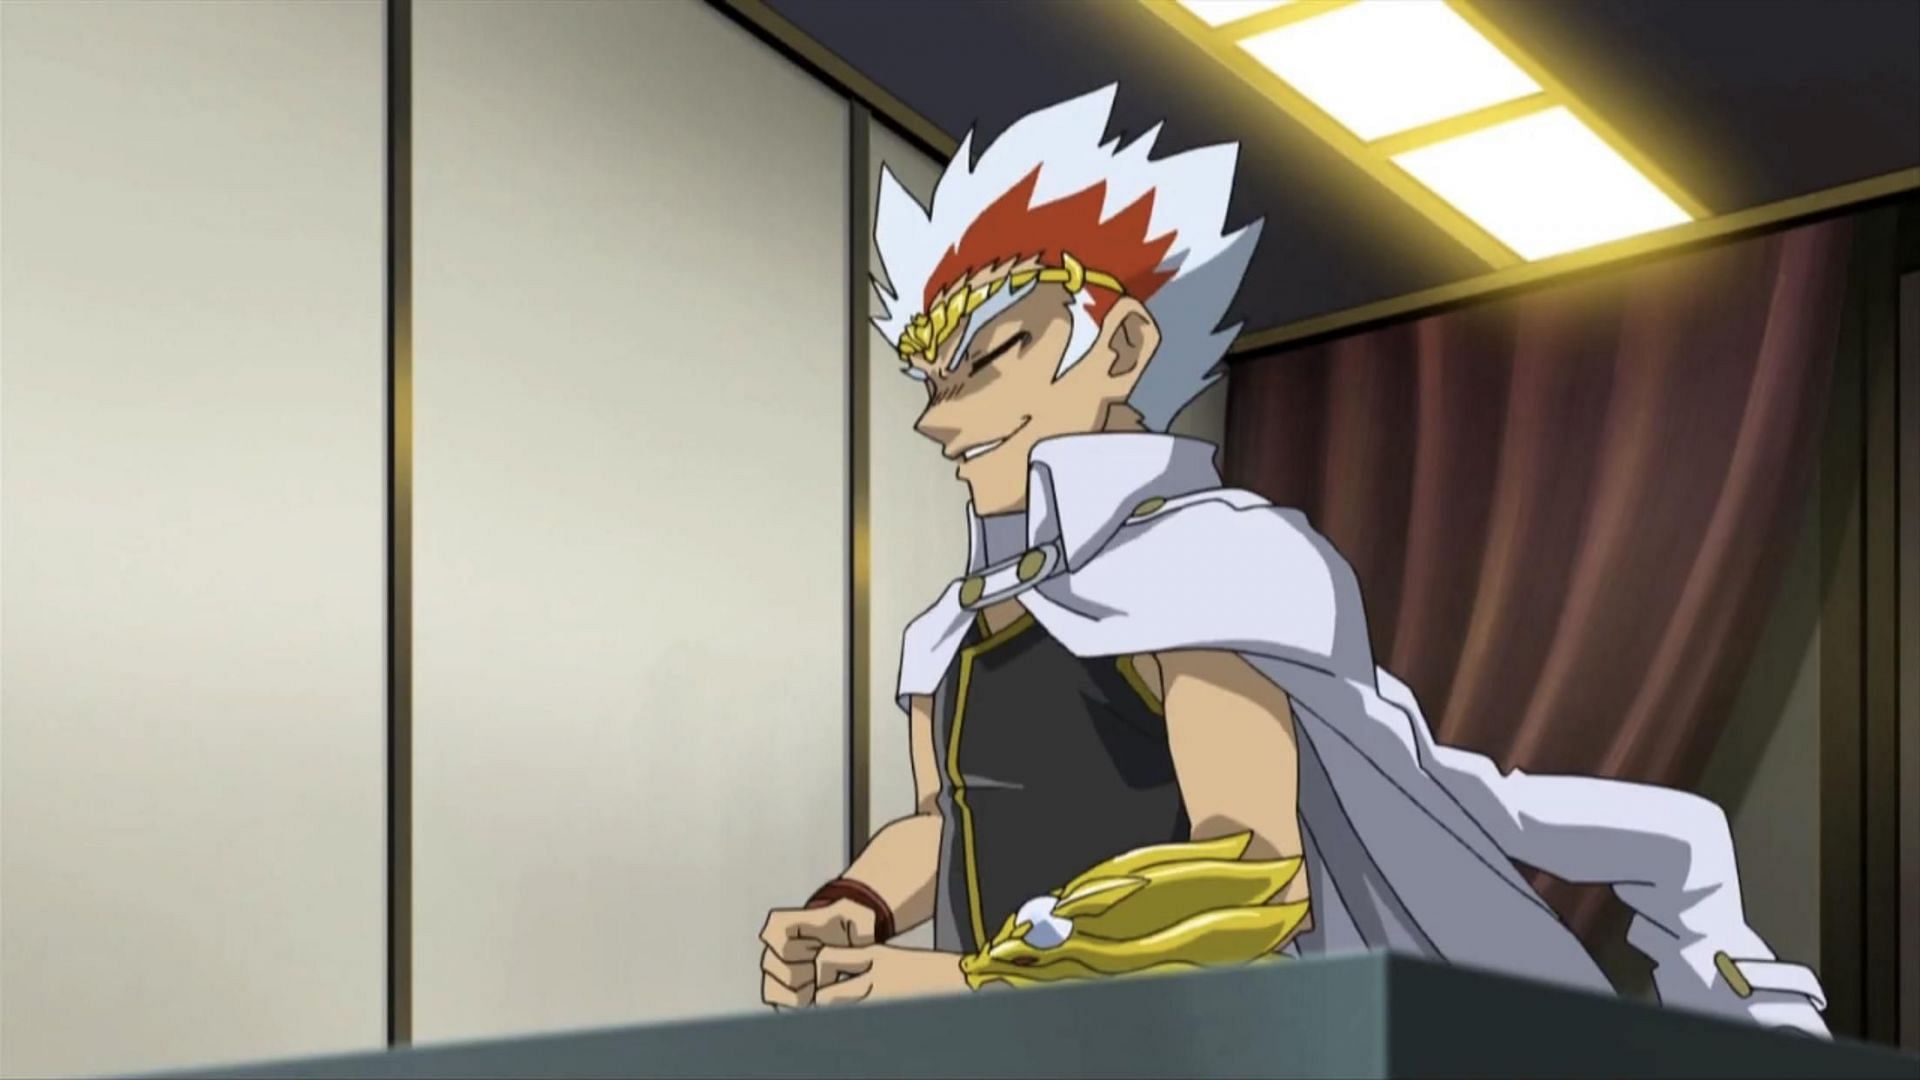 Ryuga as seen in the anime series (Image via Madhouse)